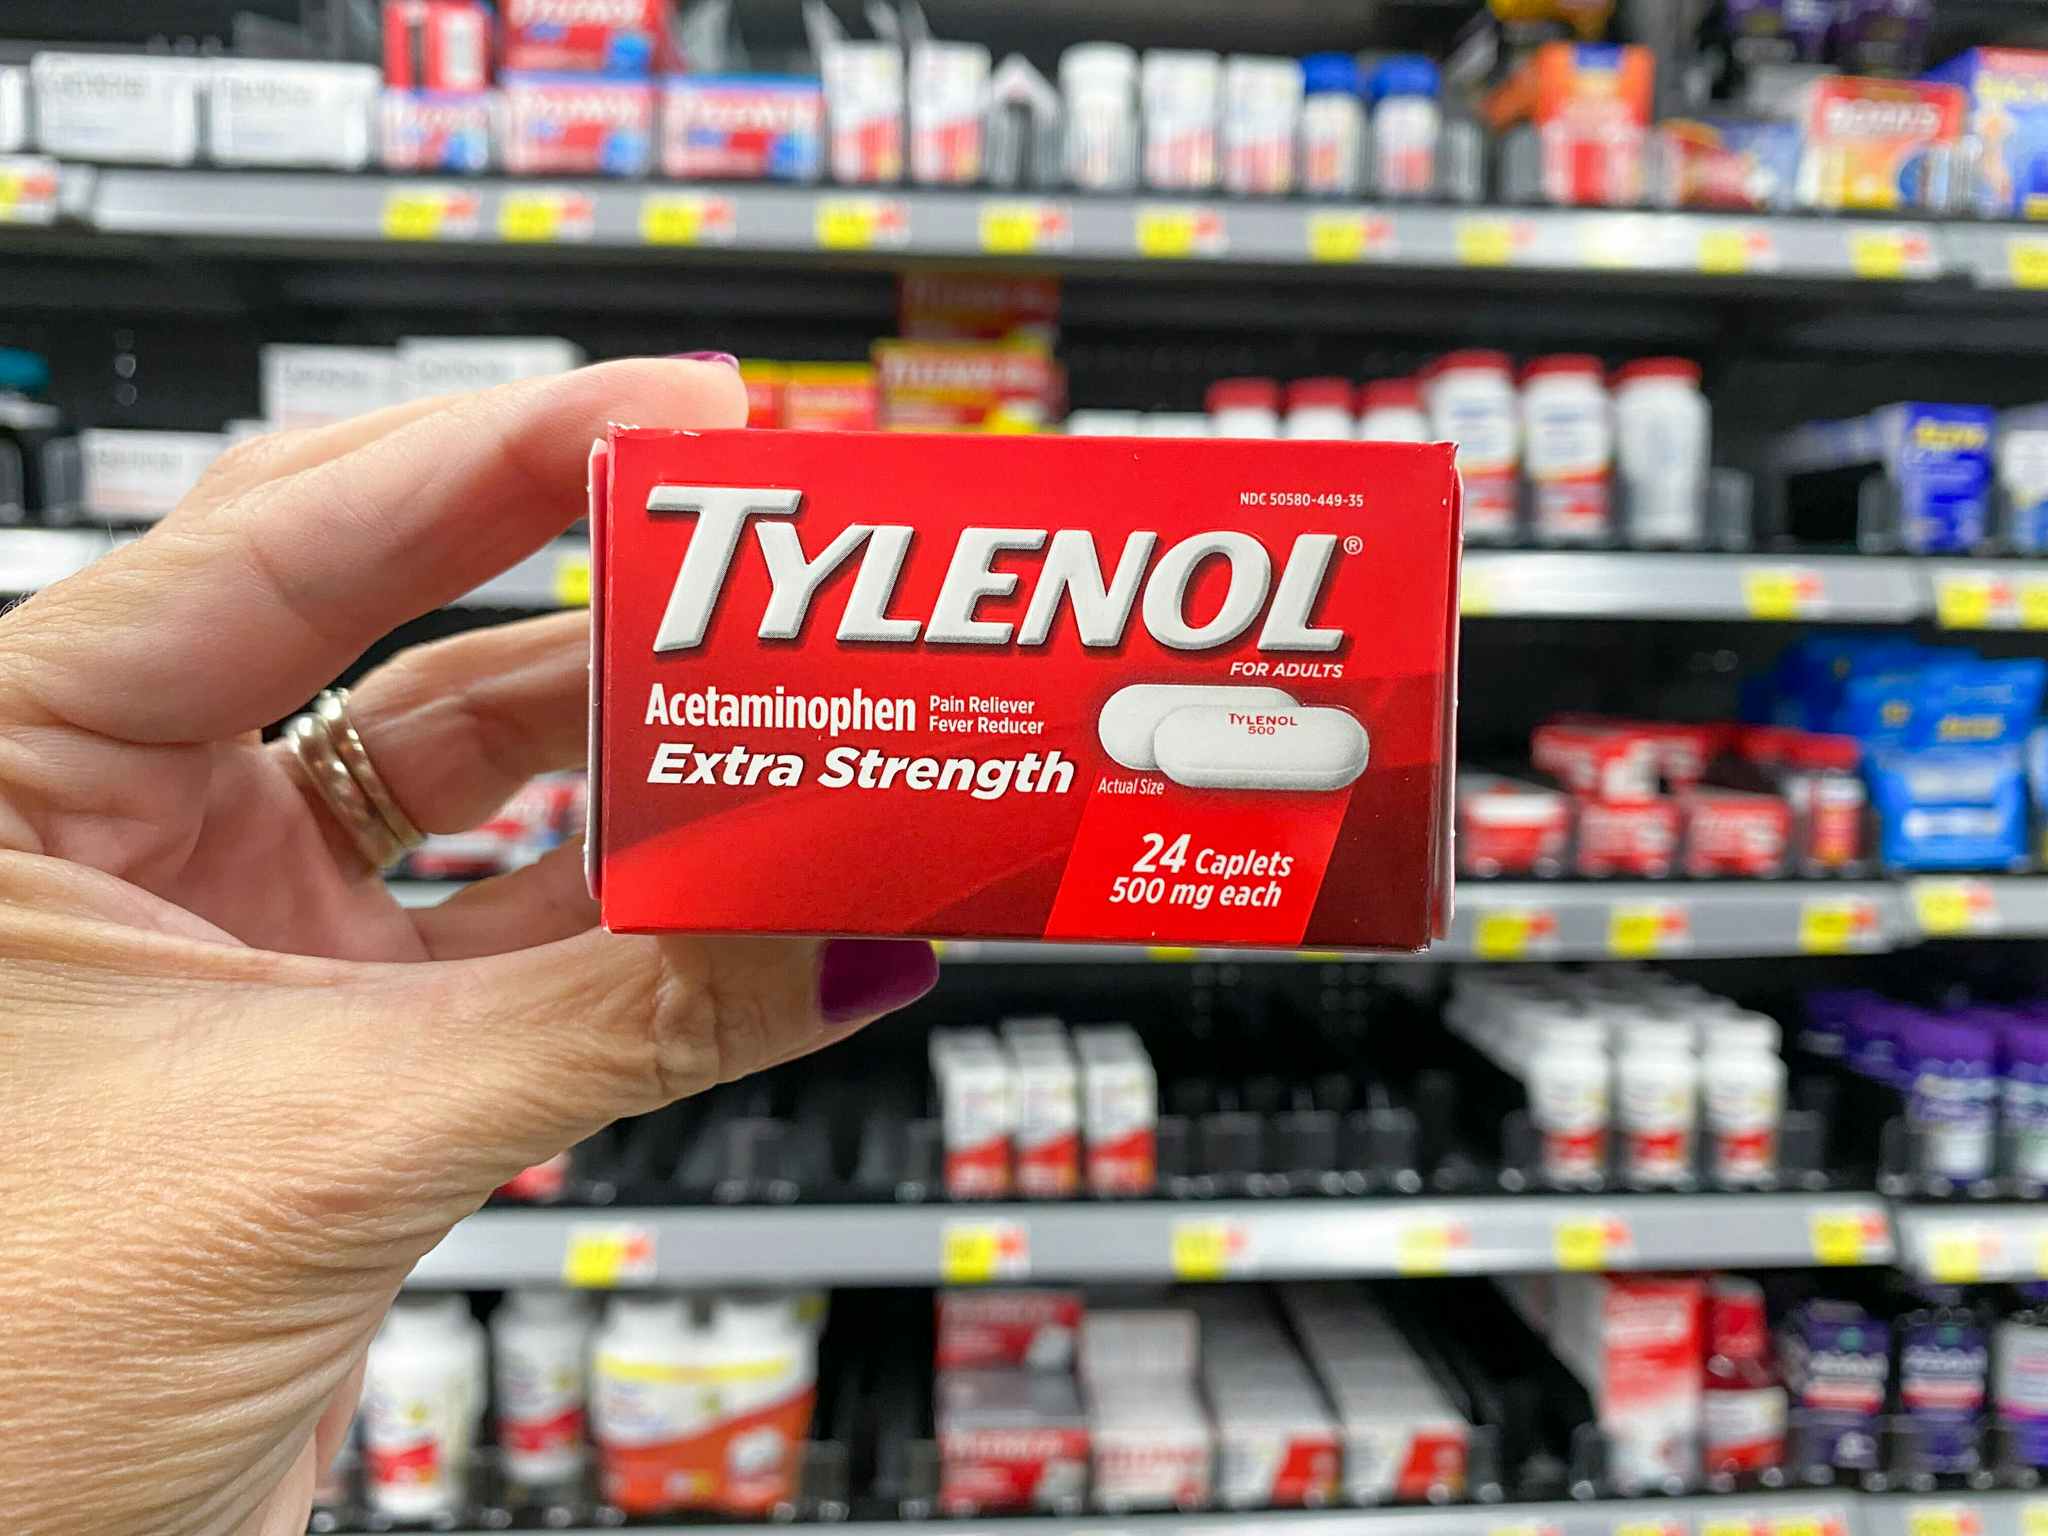 Someone holding up a box of Tylenol in a store